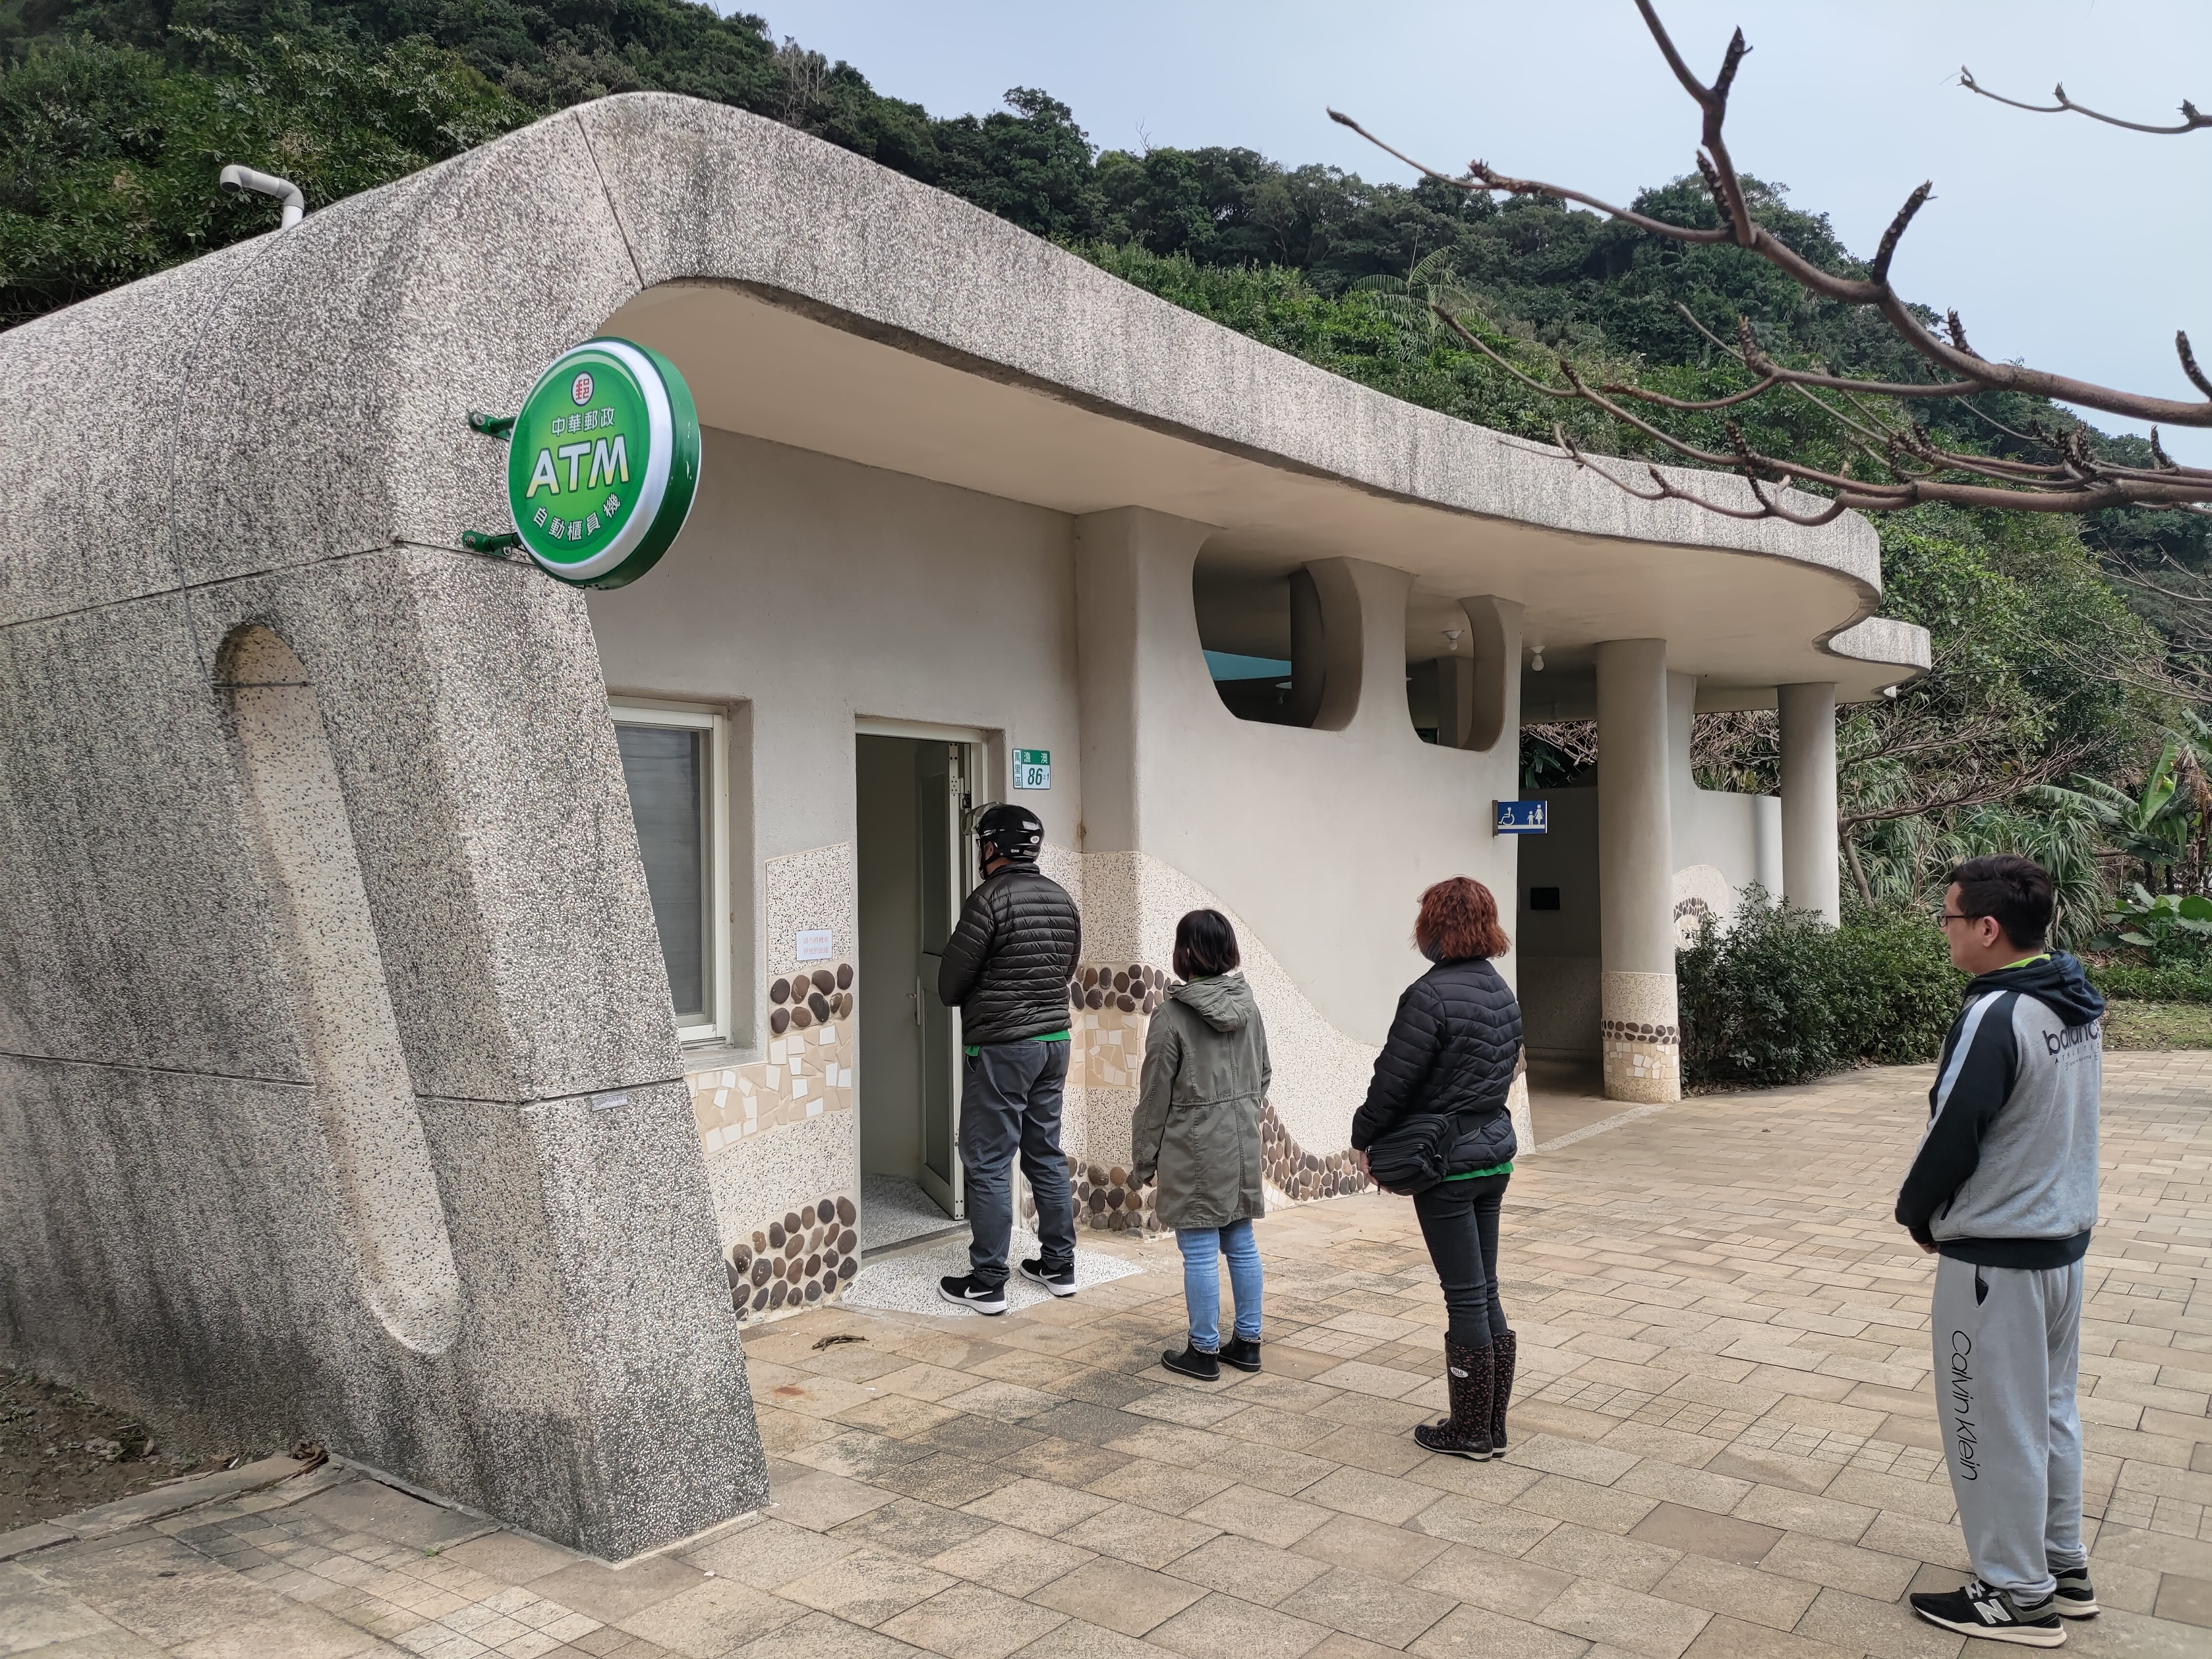 ATM in Guihou with travelers